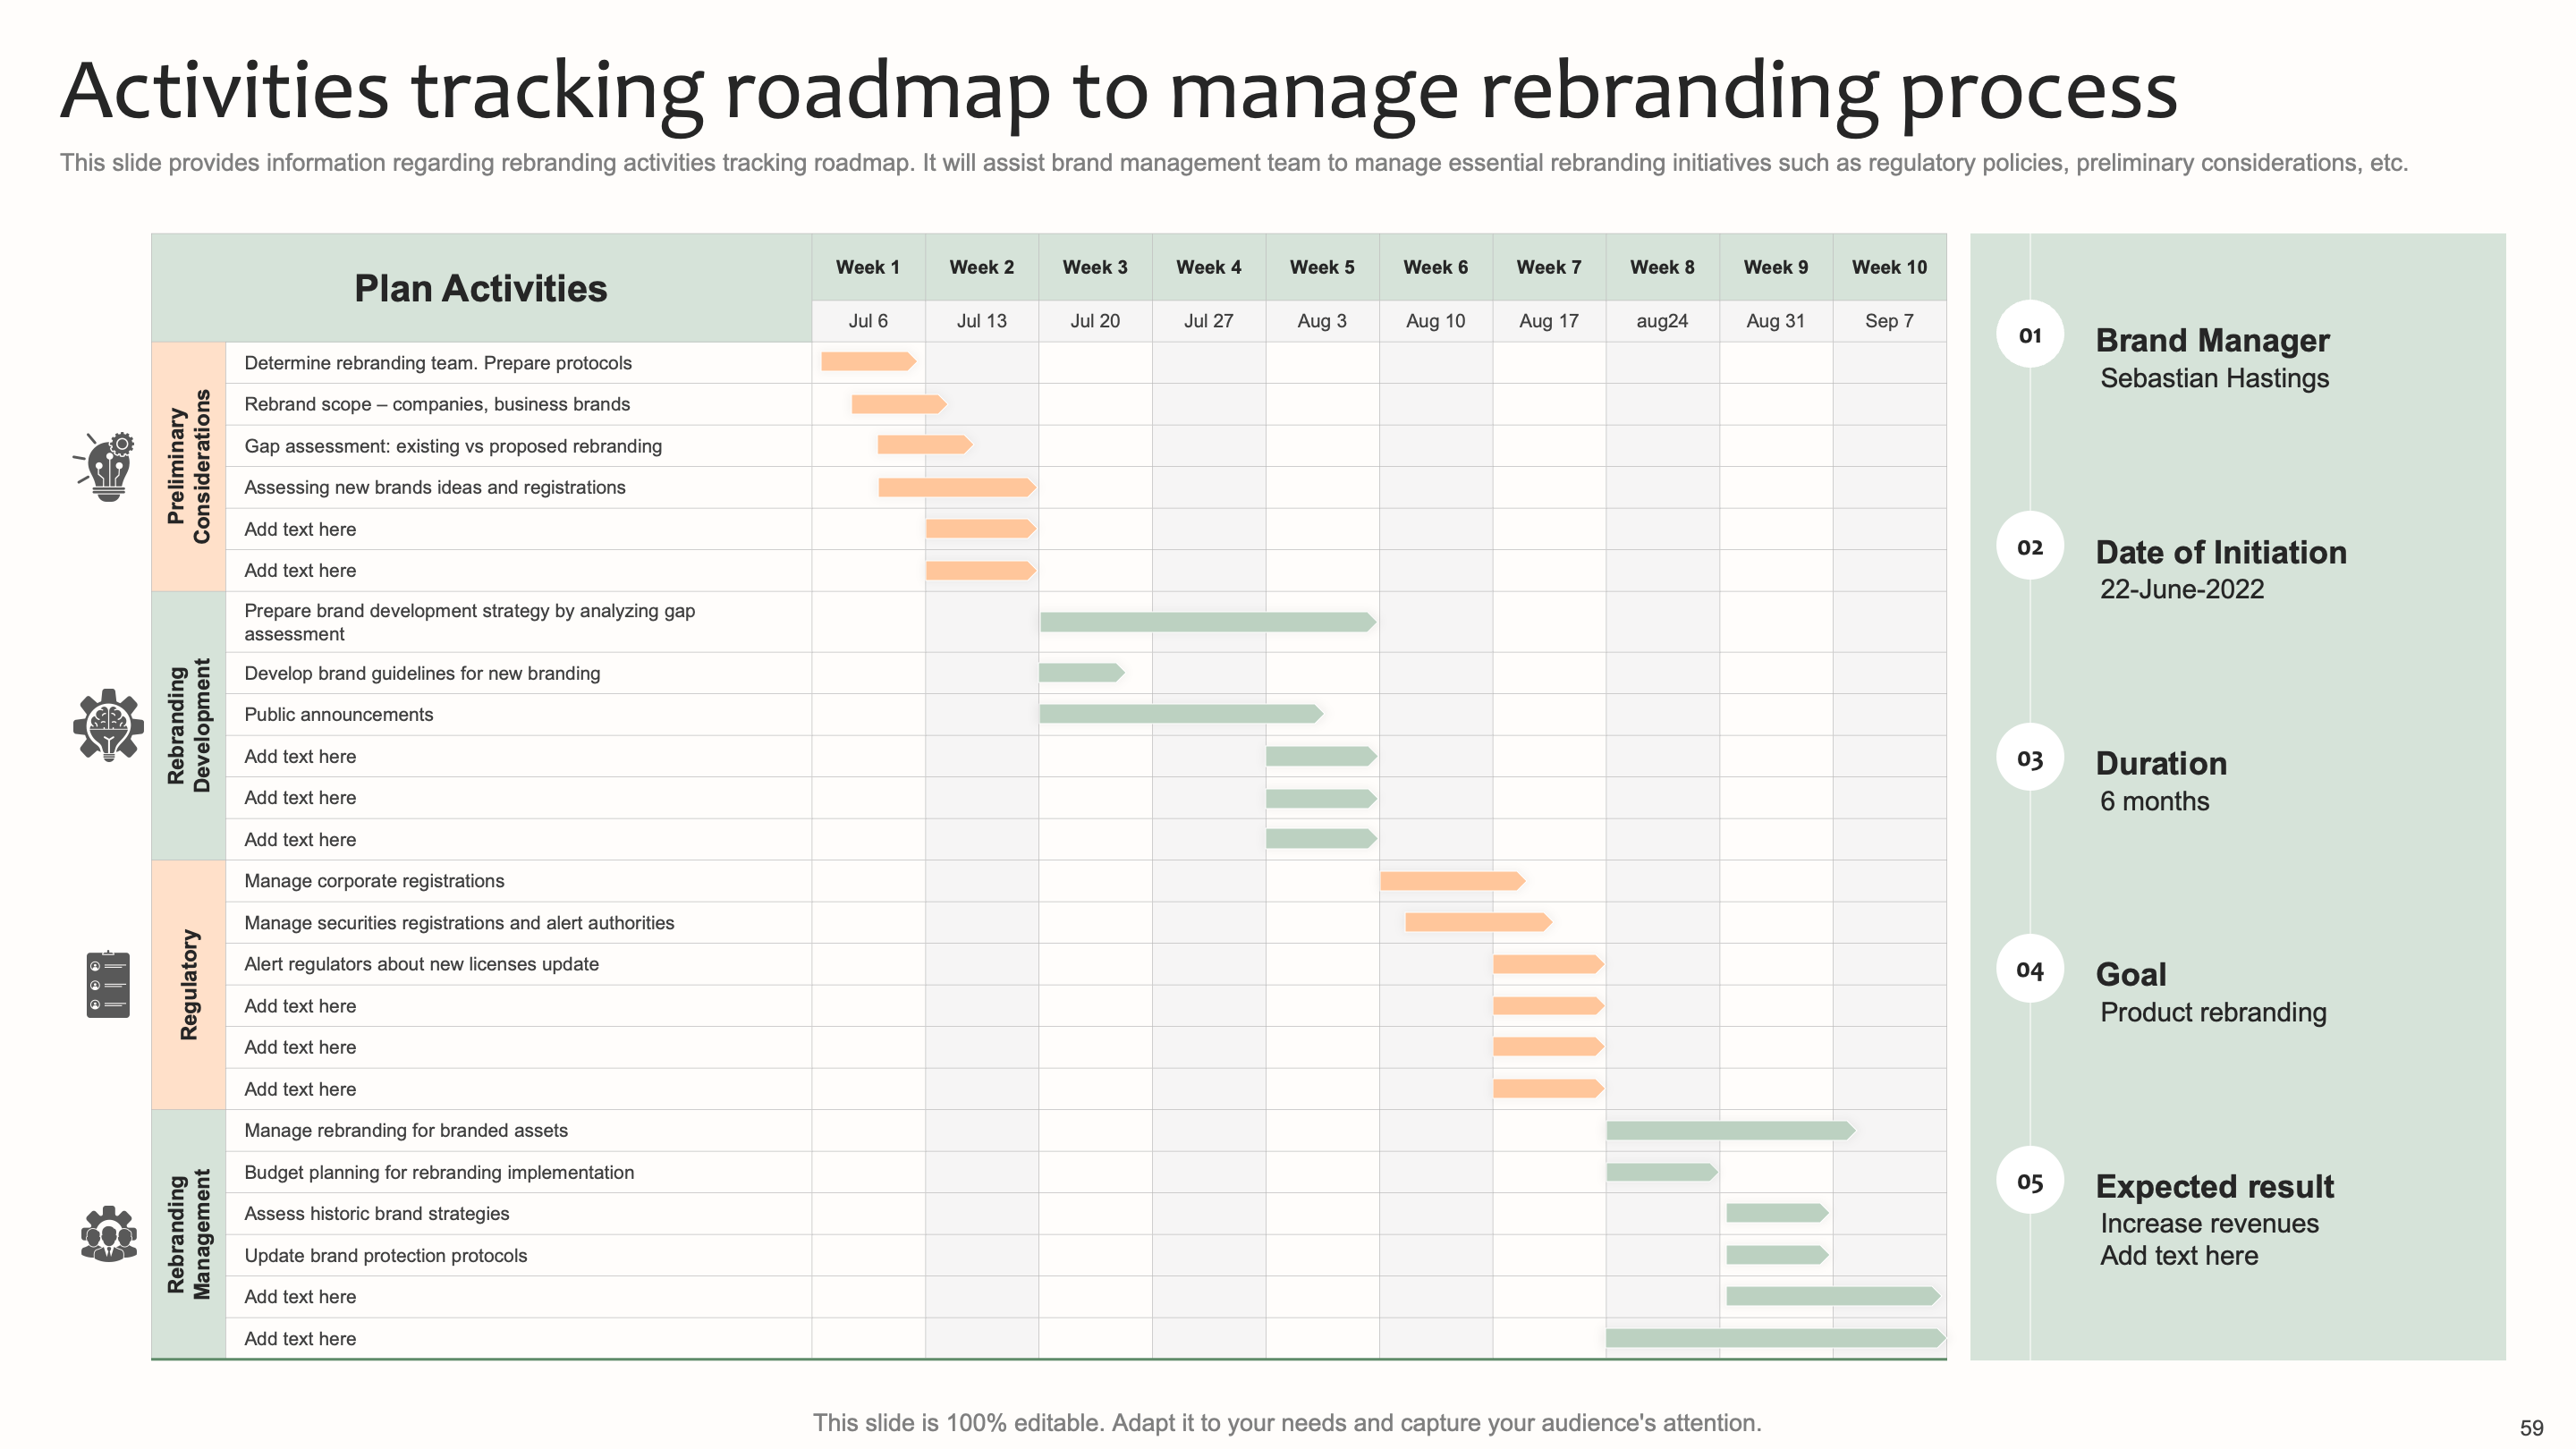 Activities Tracking Roadmap to Manage Rebranding Process